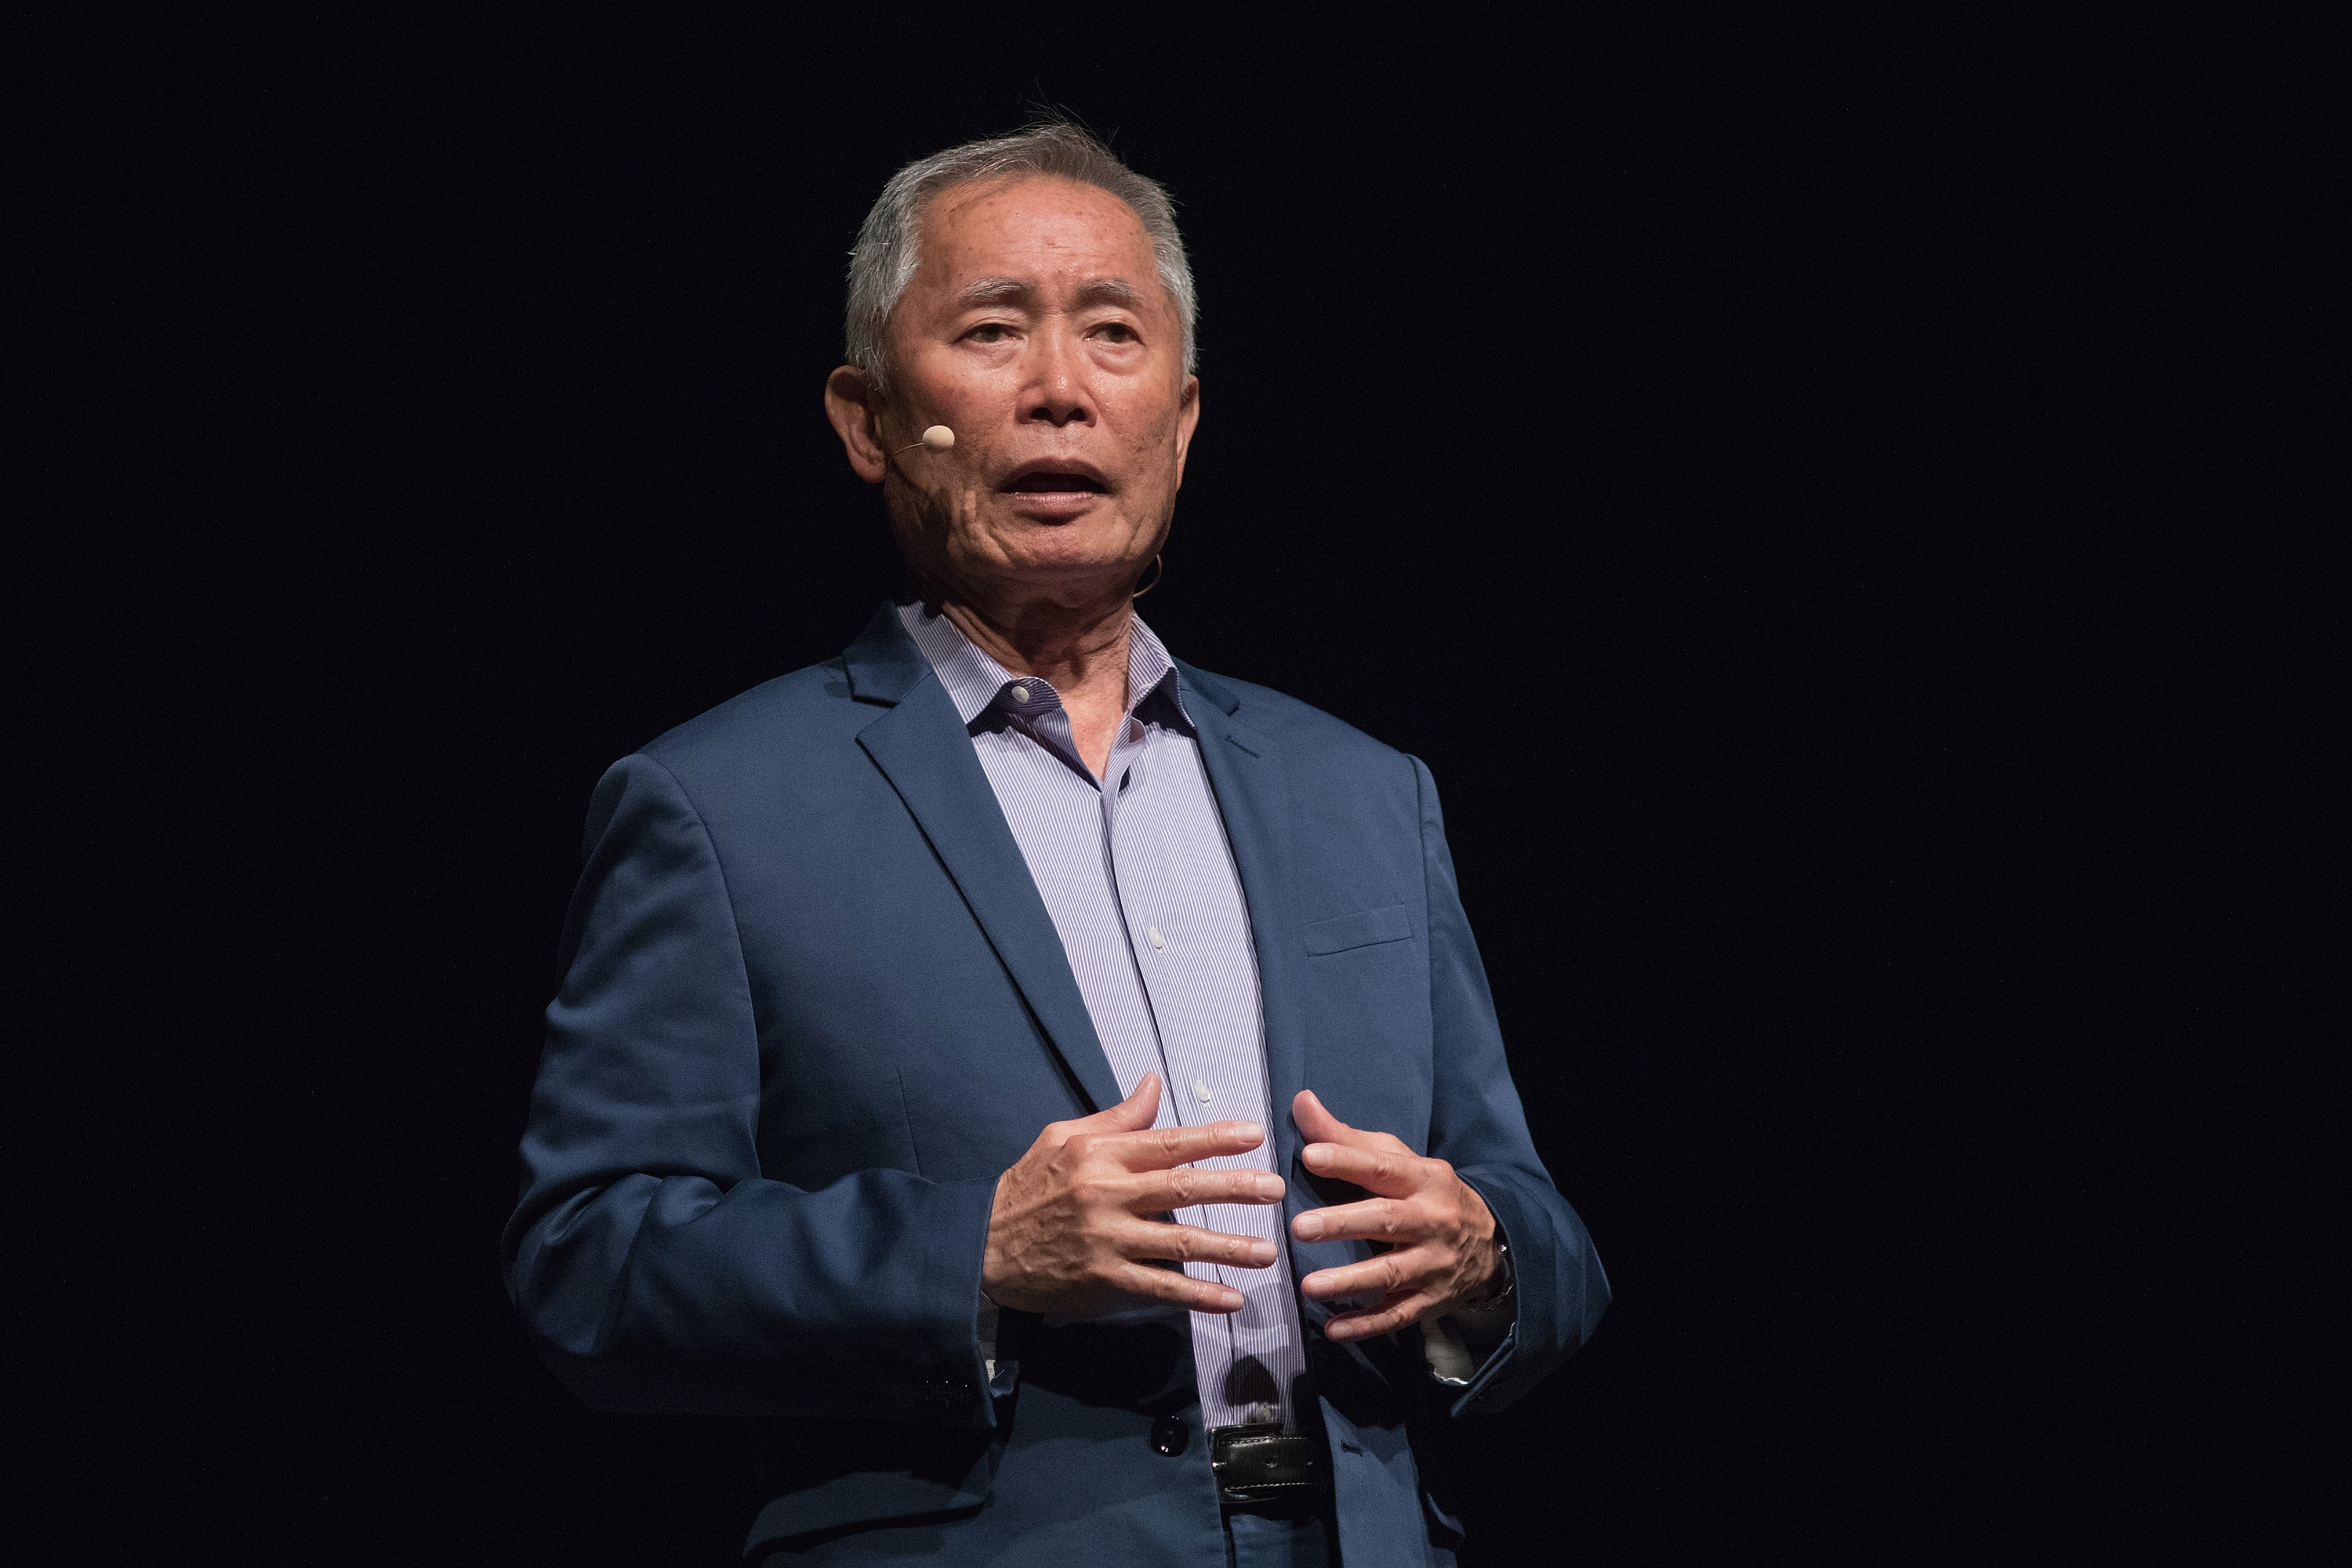 Actor George Takei speaks onstage during 'An Evening with George Takei' at the Long Center on May 4, 2018 in Austin, Texas. (Rick Kern/WireImage)